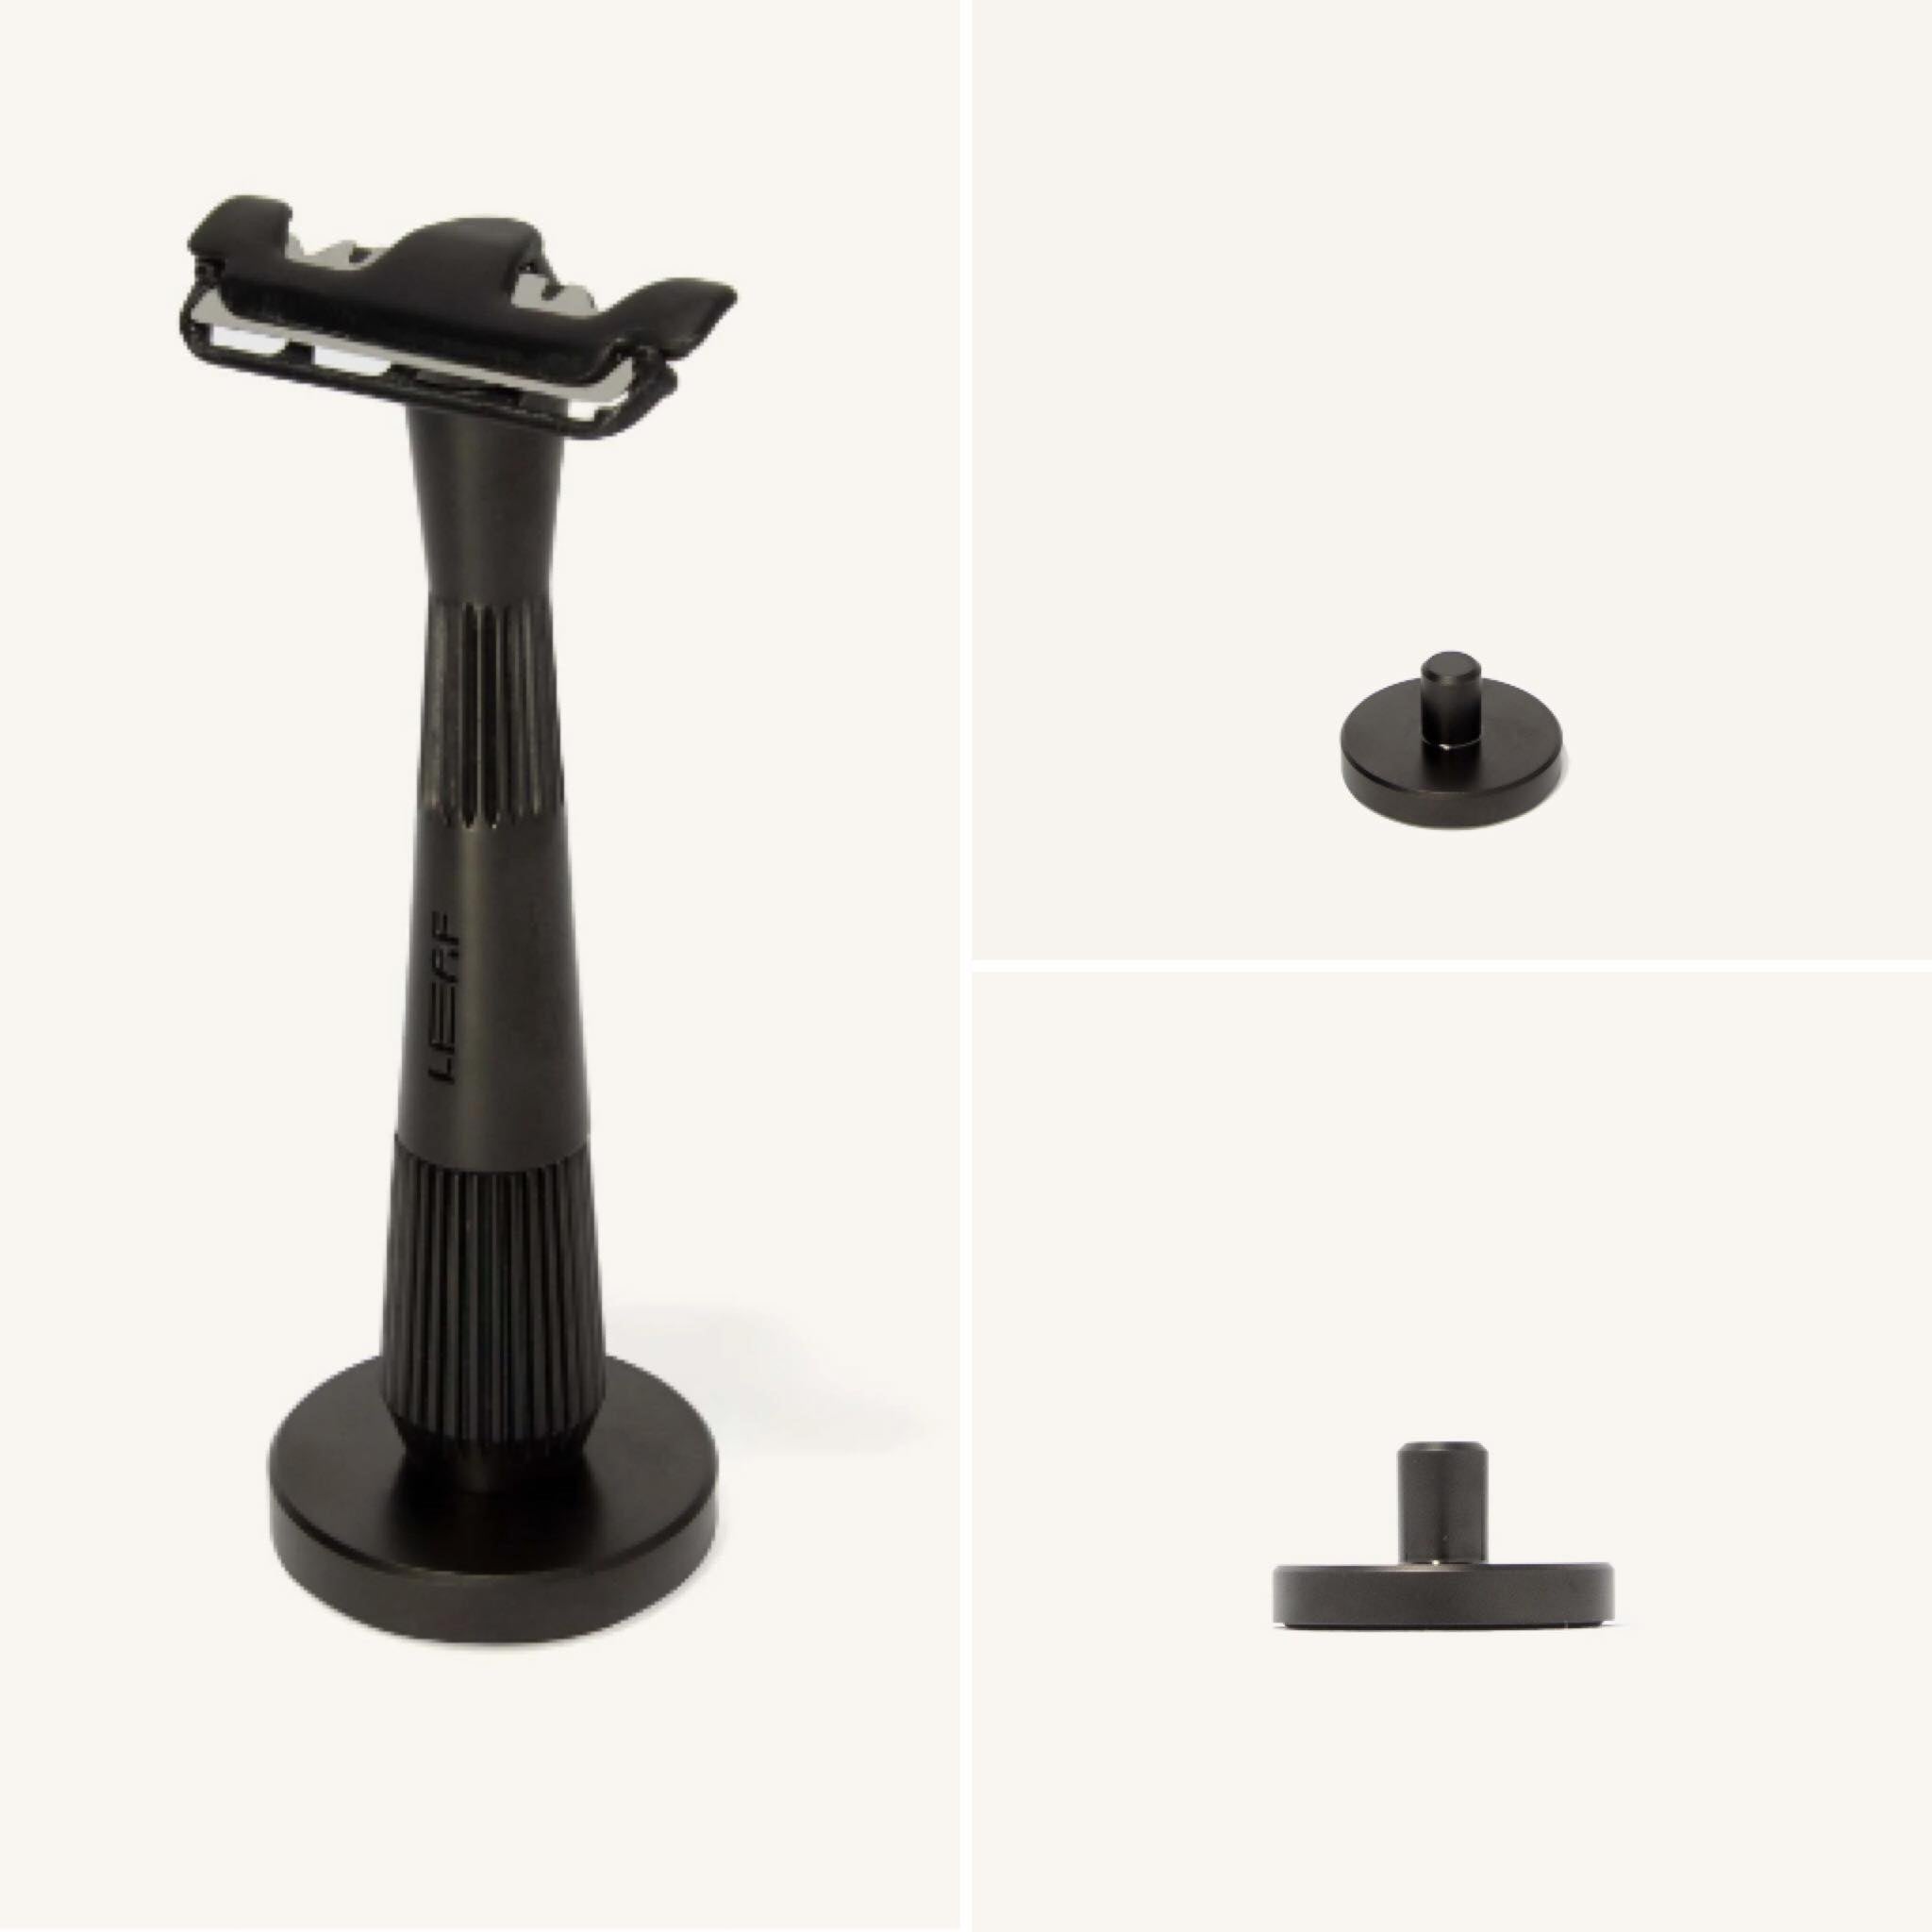 Display your black Twig (or Thorn) razor proudly in this convenient stand designed with helpful features like an embedded rubber foot so that it stays in place.